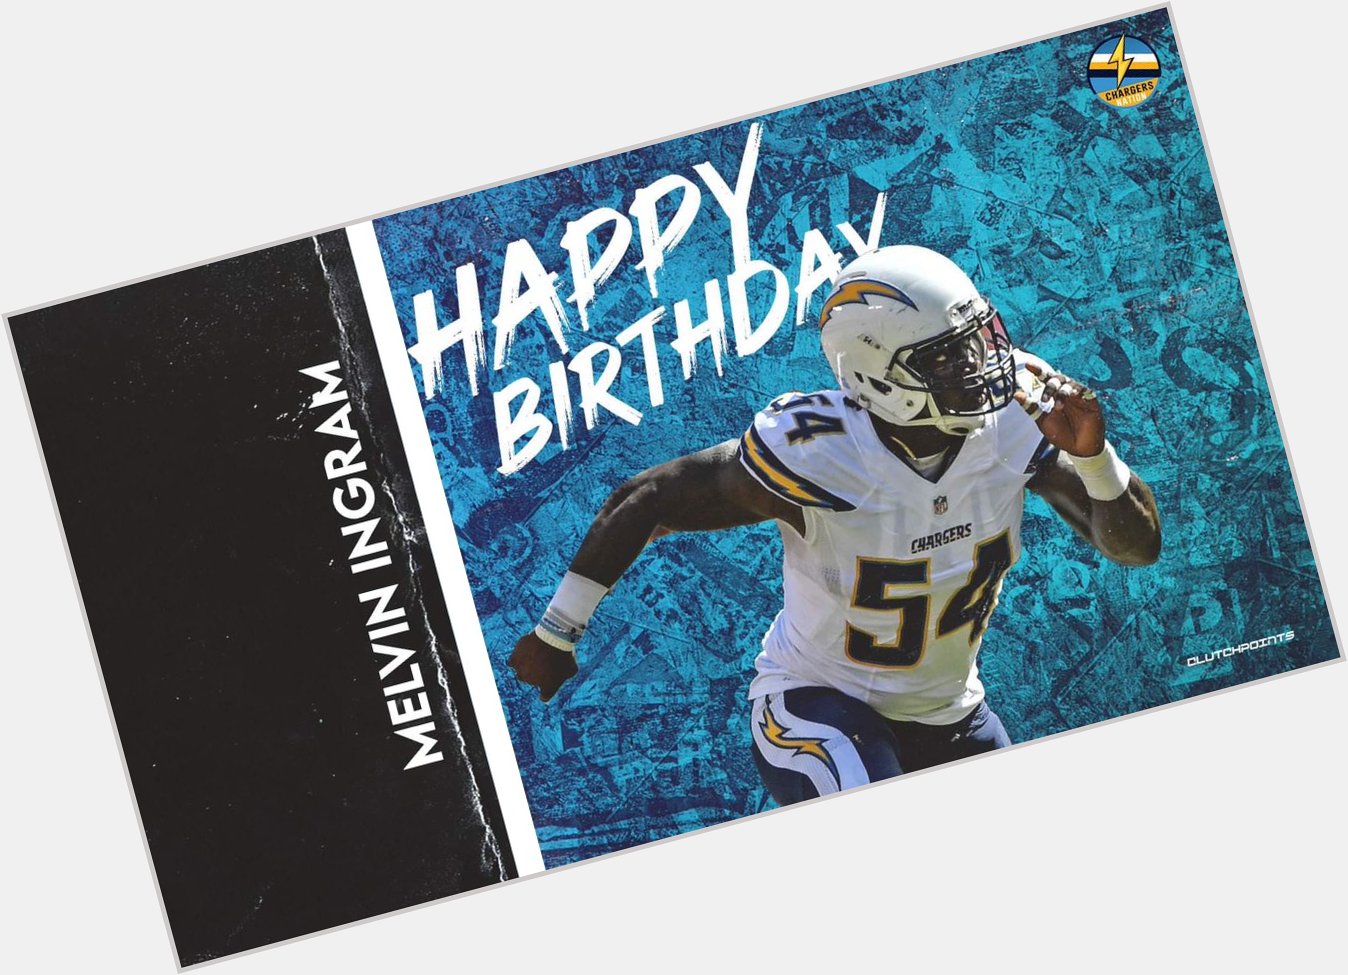 Join Chargers Nation in greeting Melvin Ingram a happy 32nd birthday! 